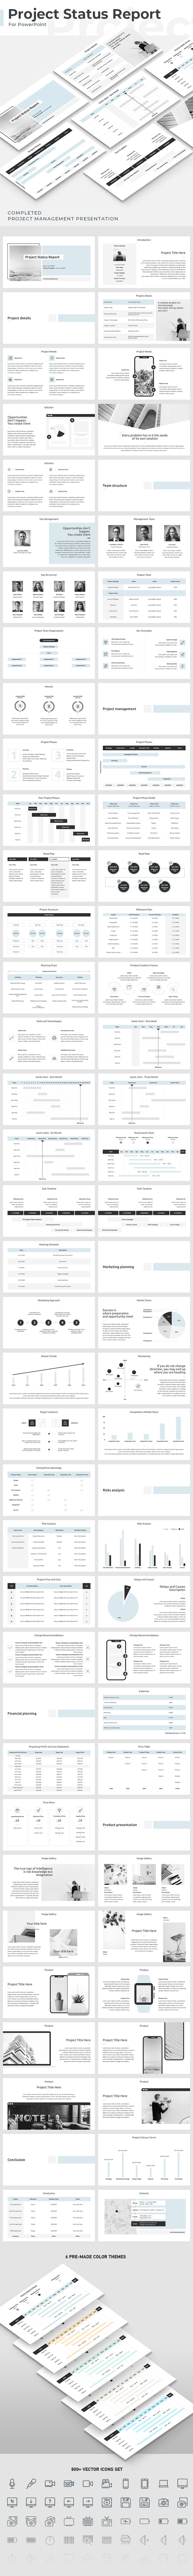 Project Proposal report web site UI wireframe Web presentation template Powerpoint